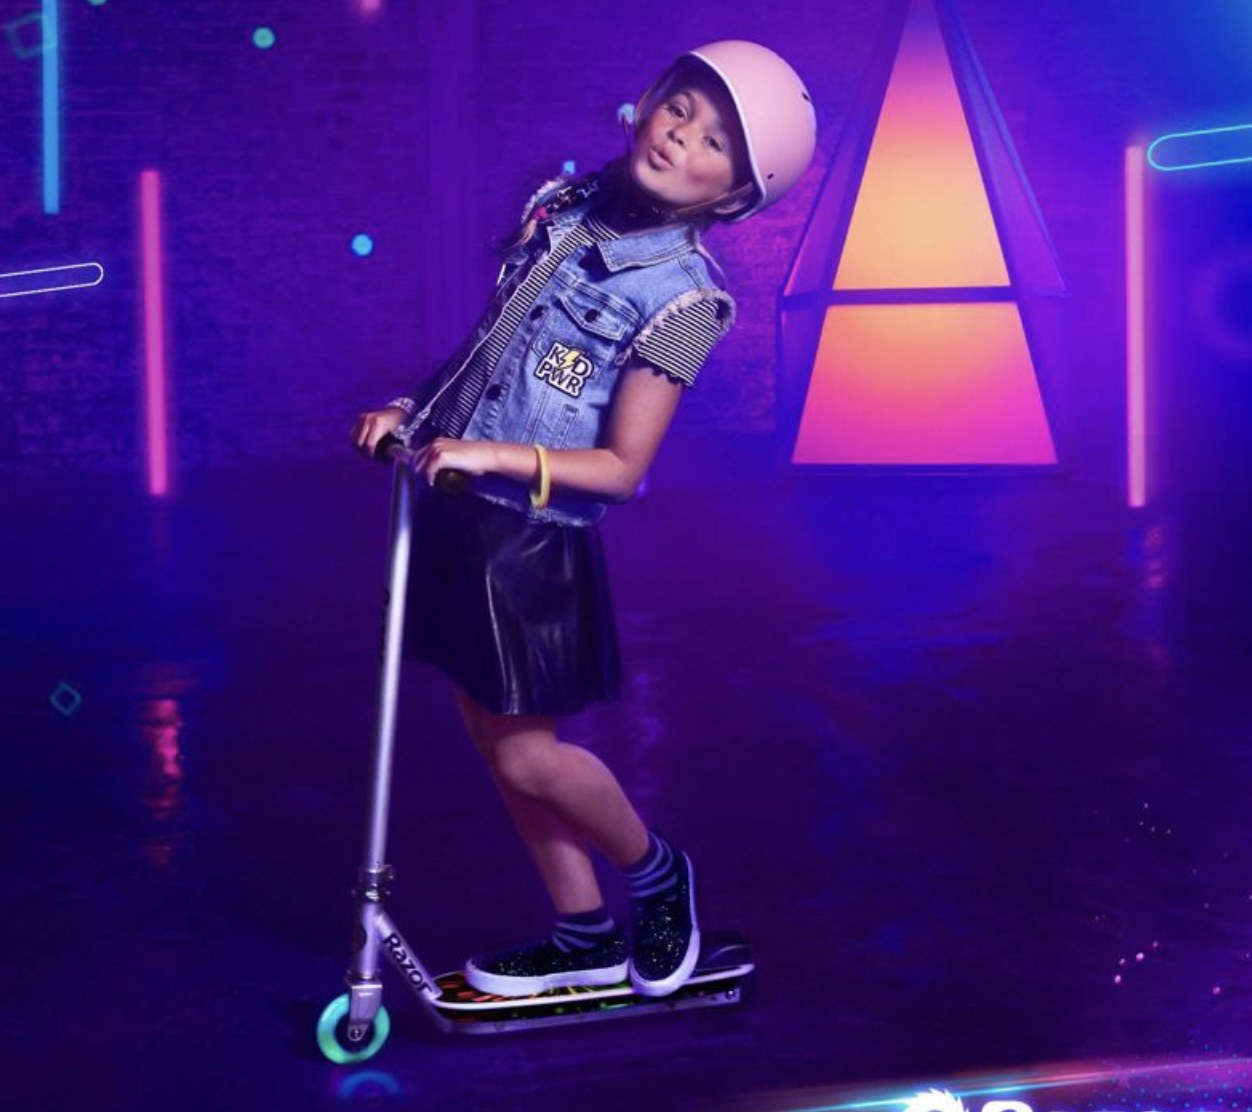 A kid model on the light-up scooter with helmet